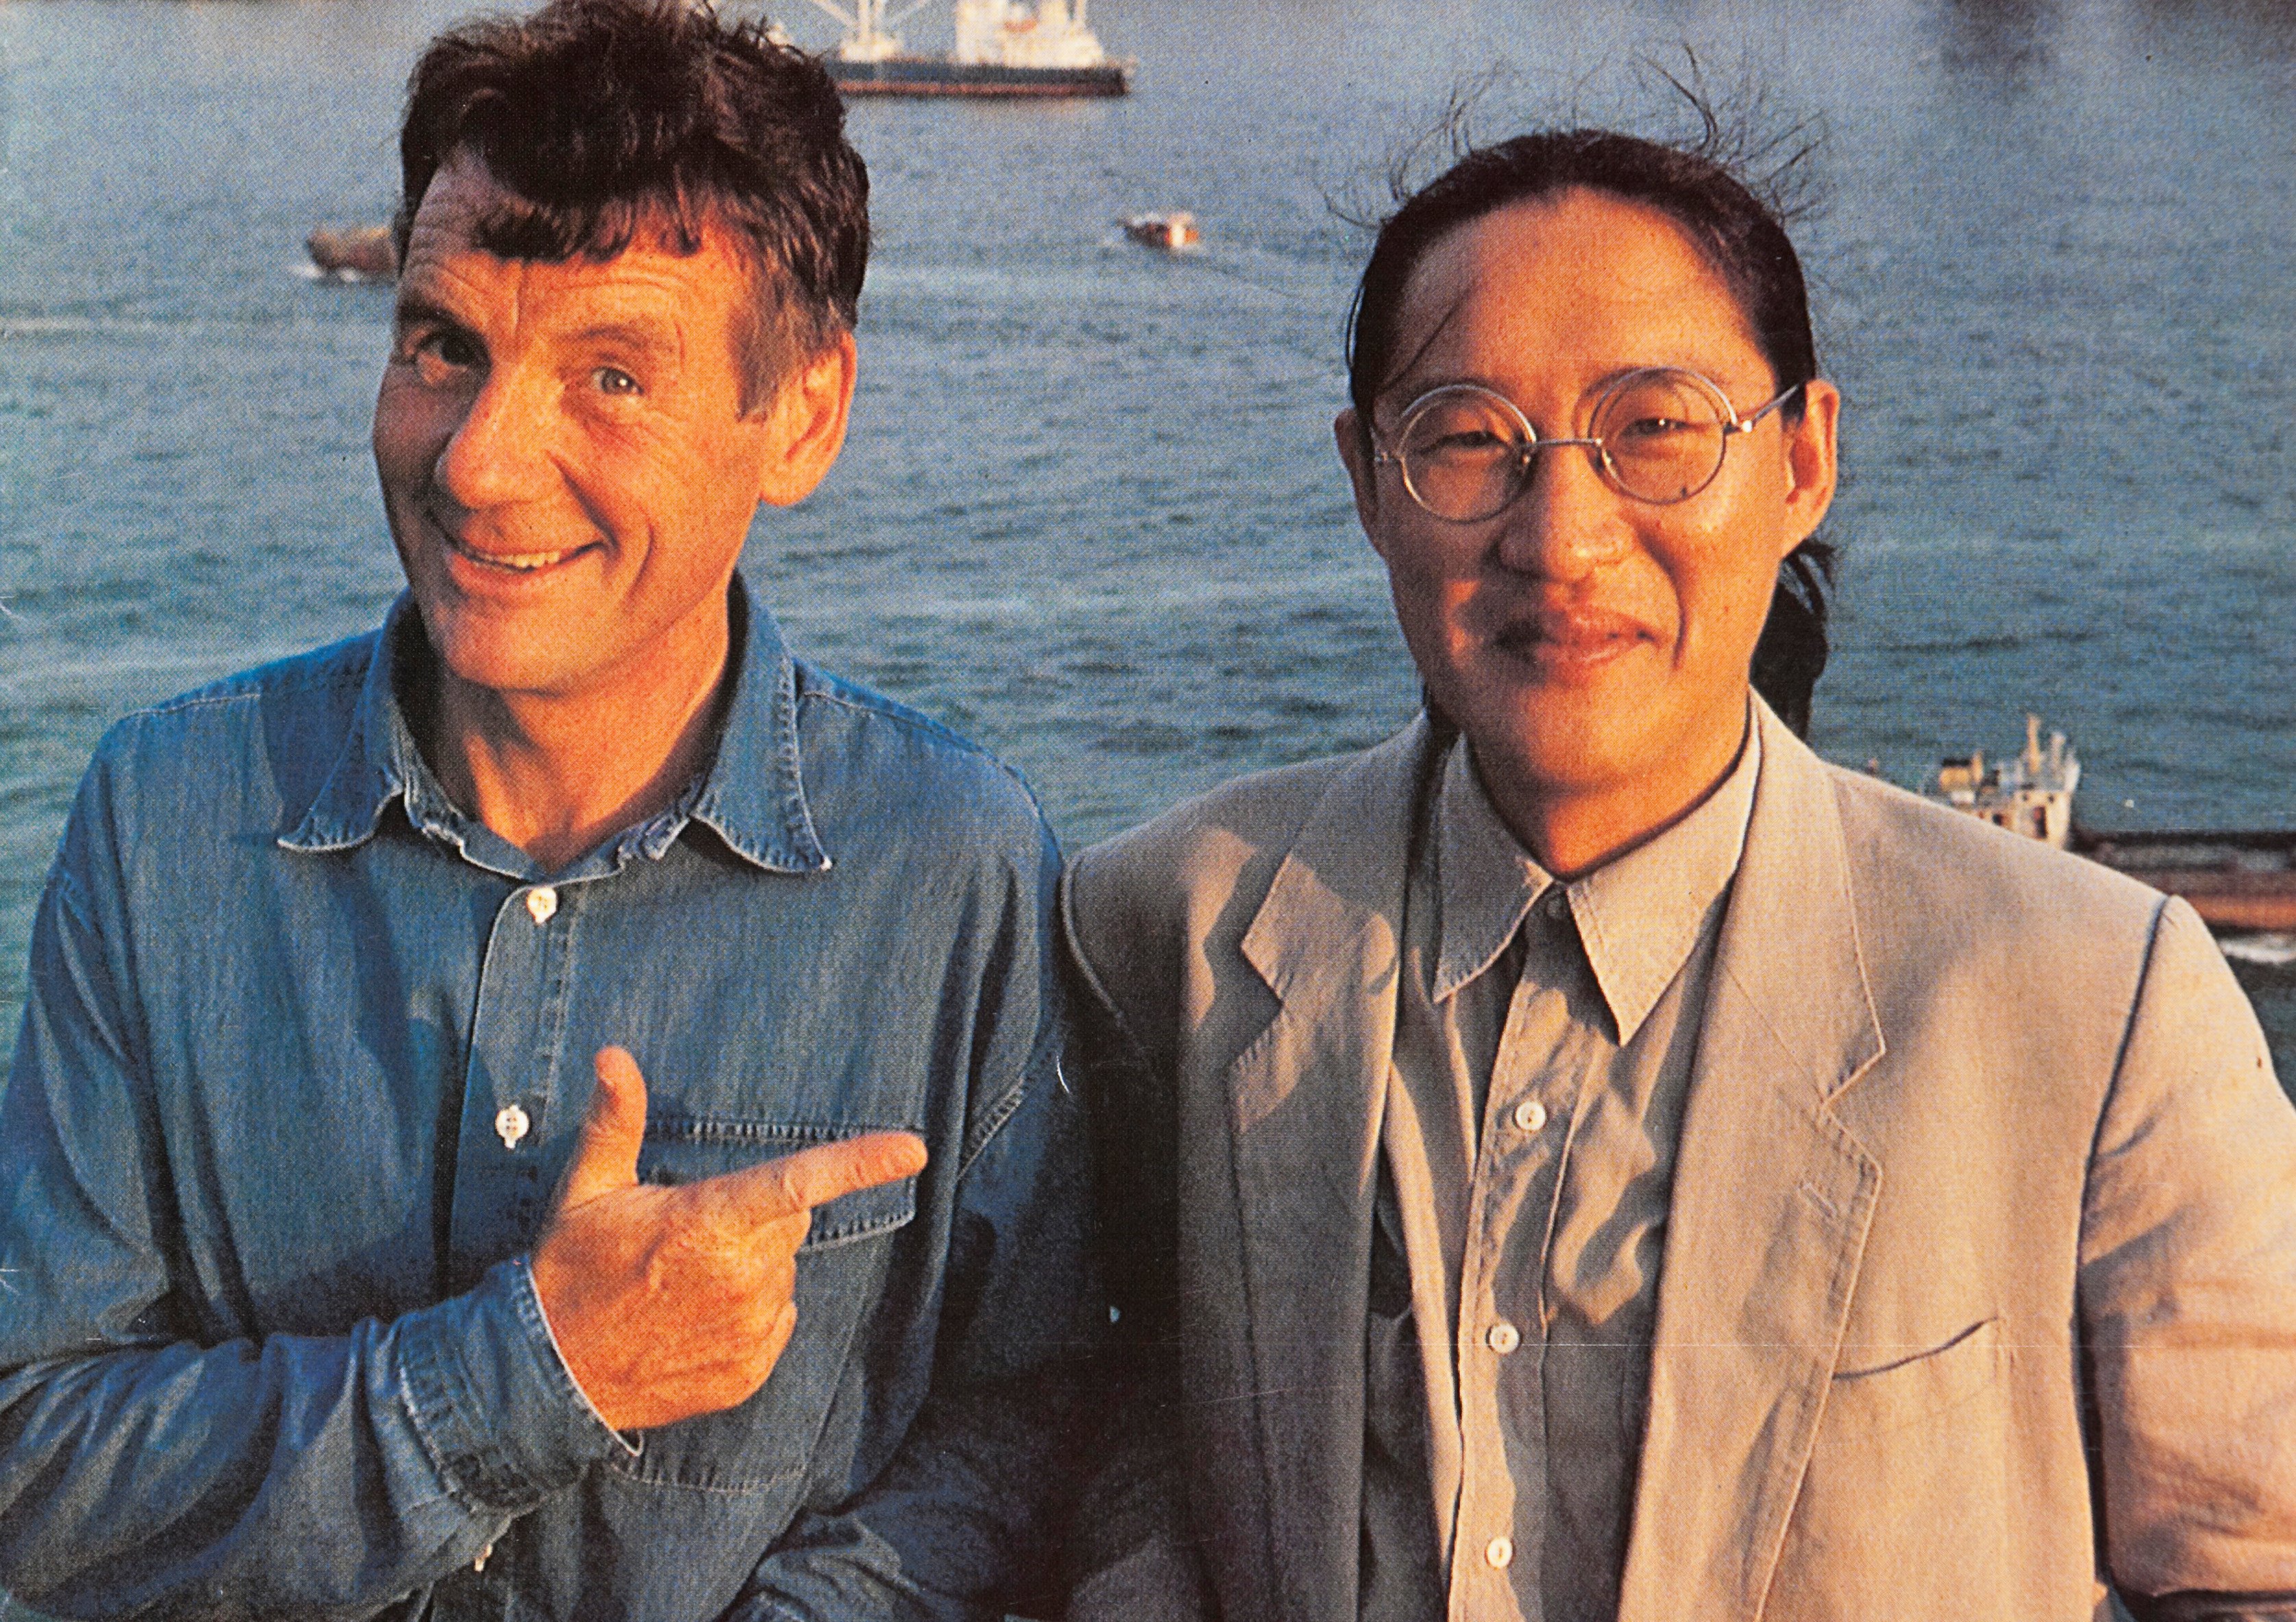 This handout image received on 21 October 2013 shows photographer Basil Pao and TV presenter Michael Palin posing for a photograph in Hong Kong Full Circle launch, a photography book by Pao, in 1996.  21OCT13  ÔøºMP and BP in Hong Kong for Full Circle launch in 1996. (Photo by )